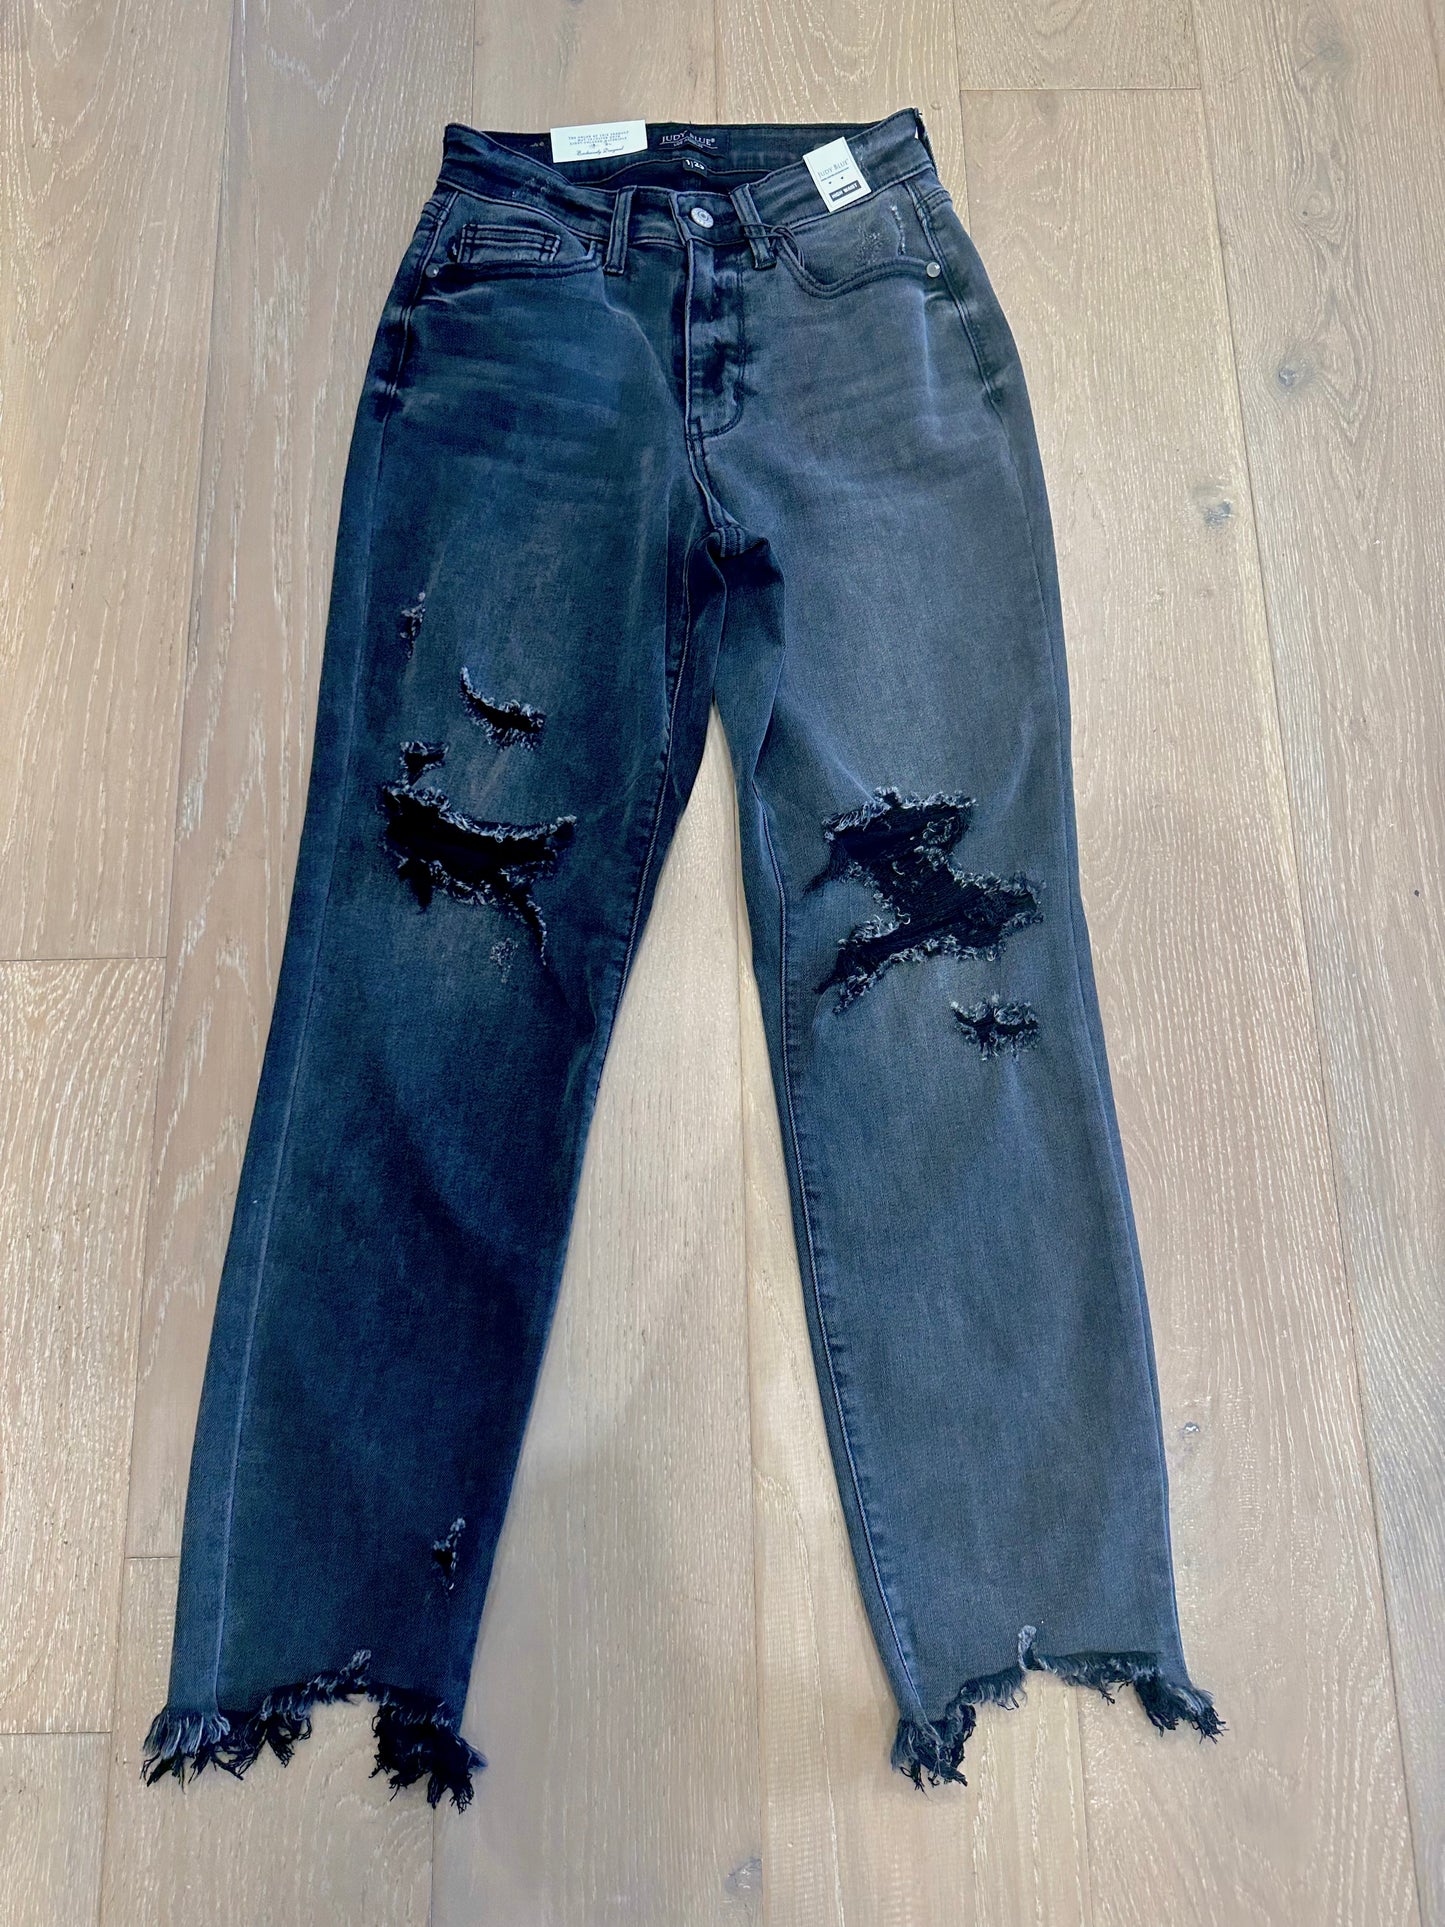 The Malley vintage black wash jeans